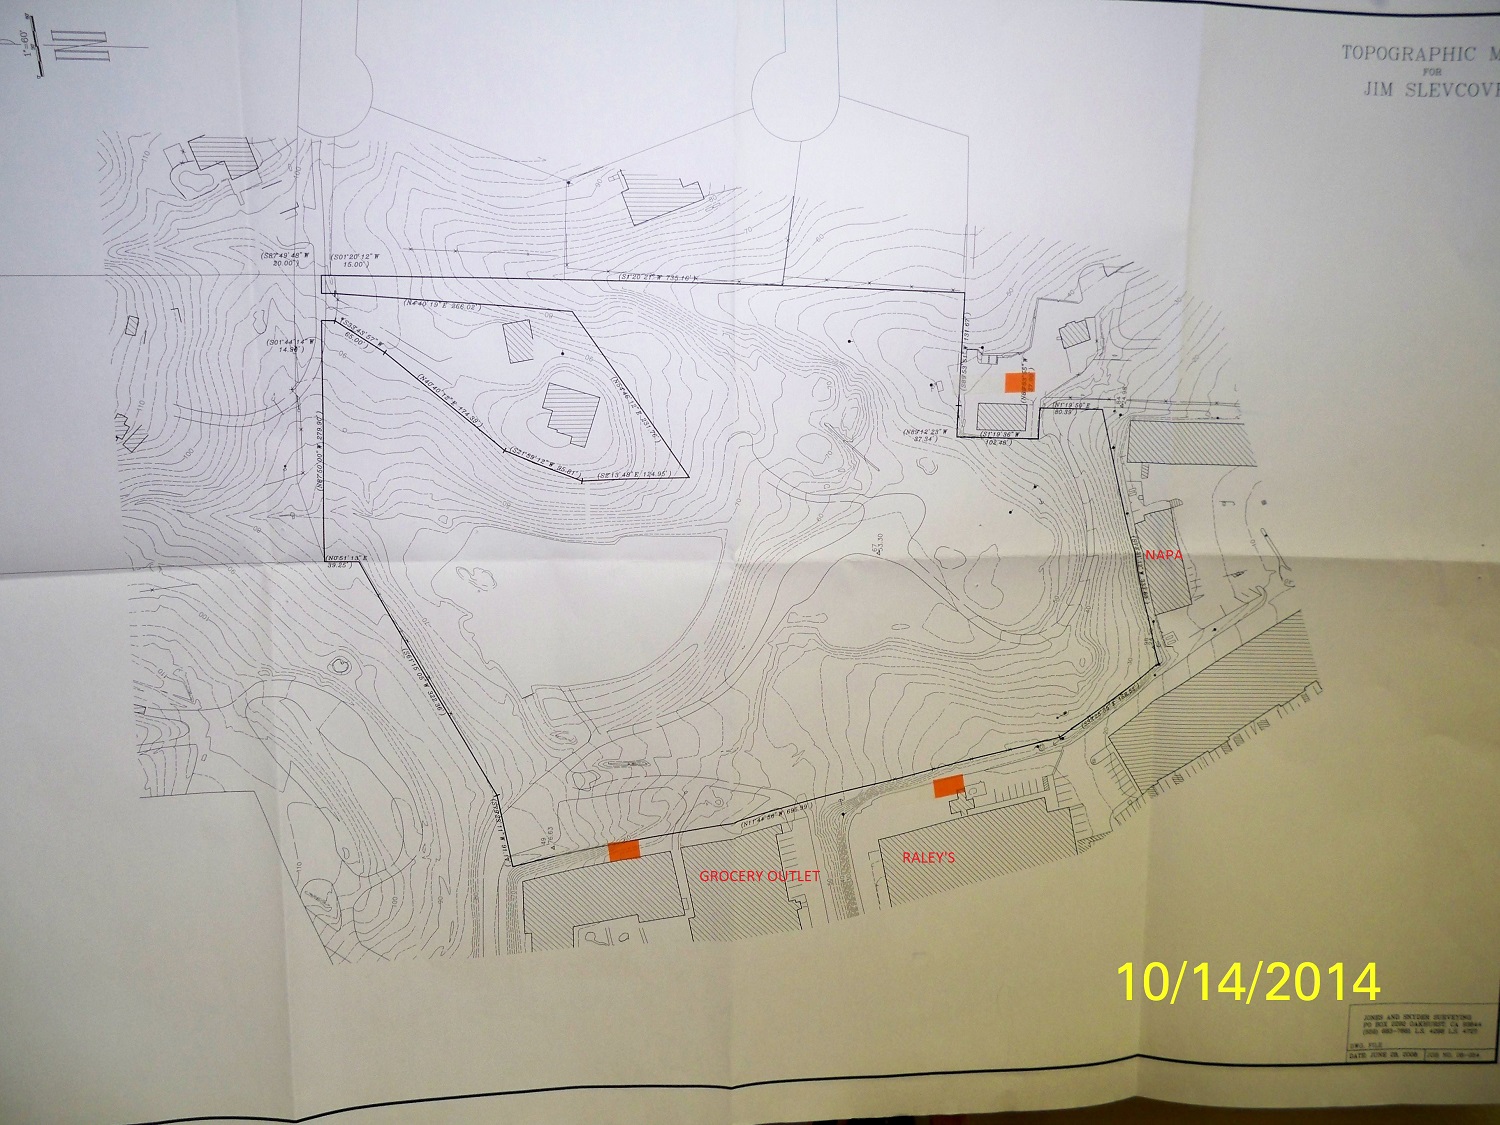 Cemetery expansion map